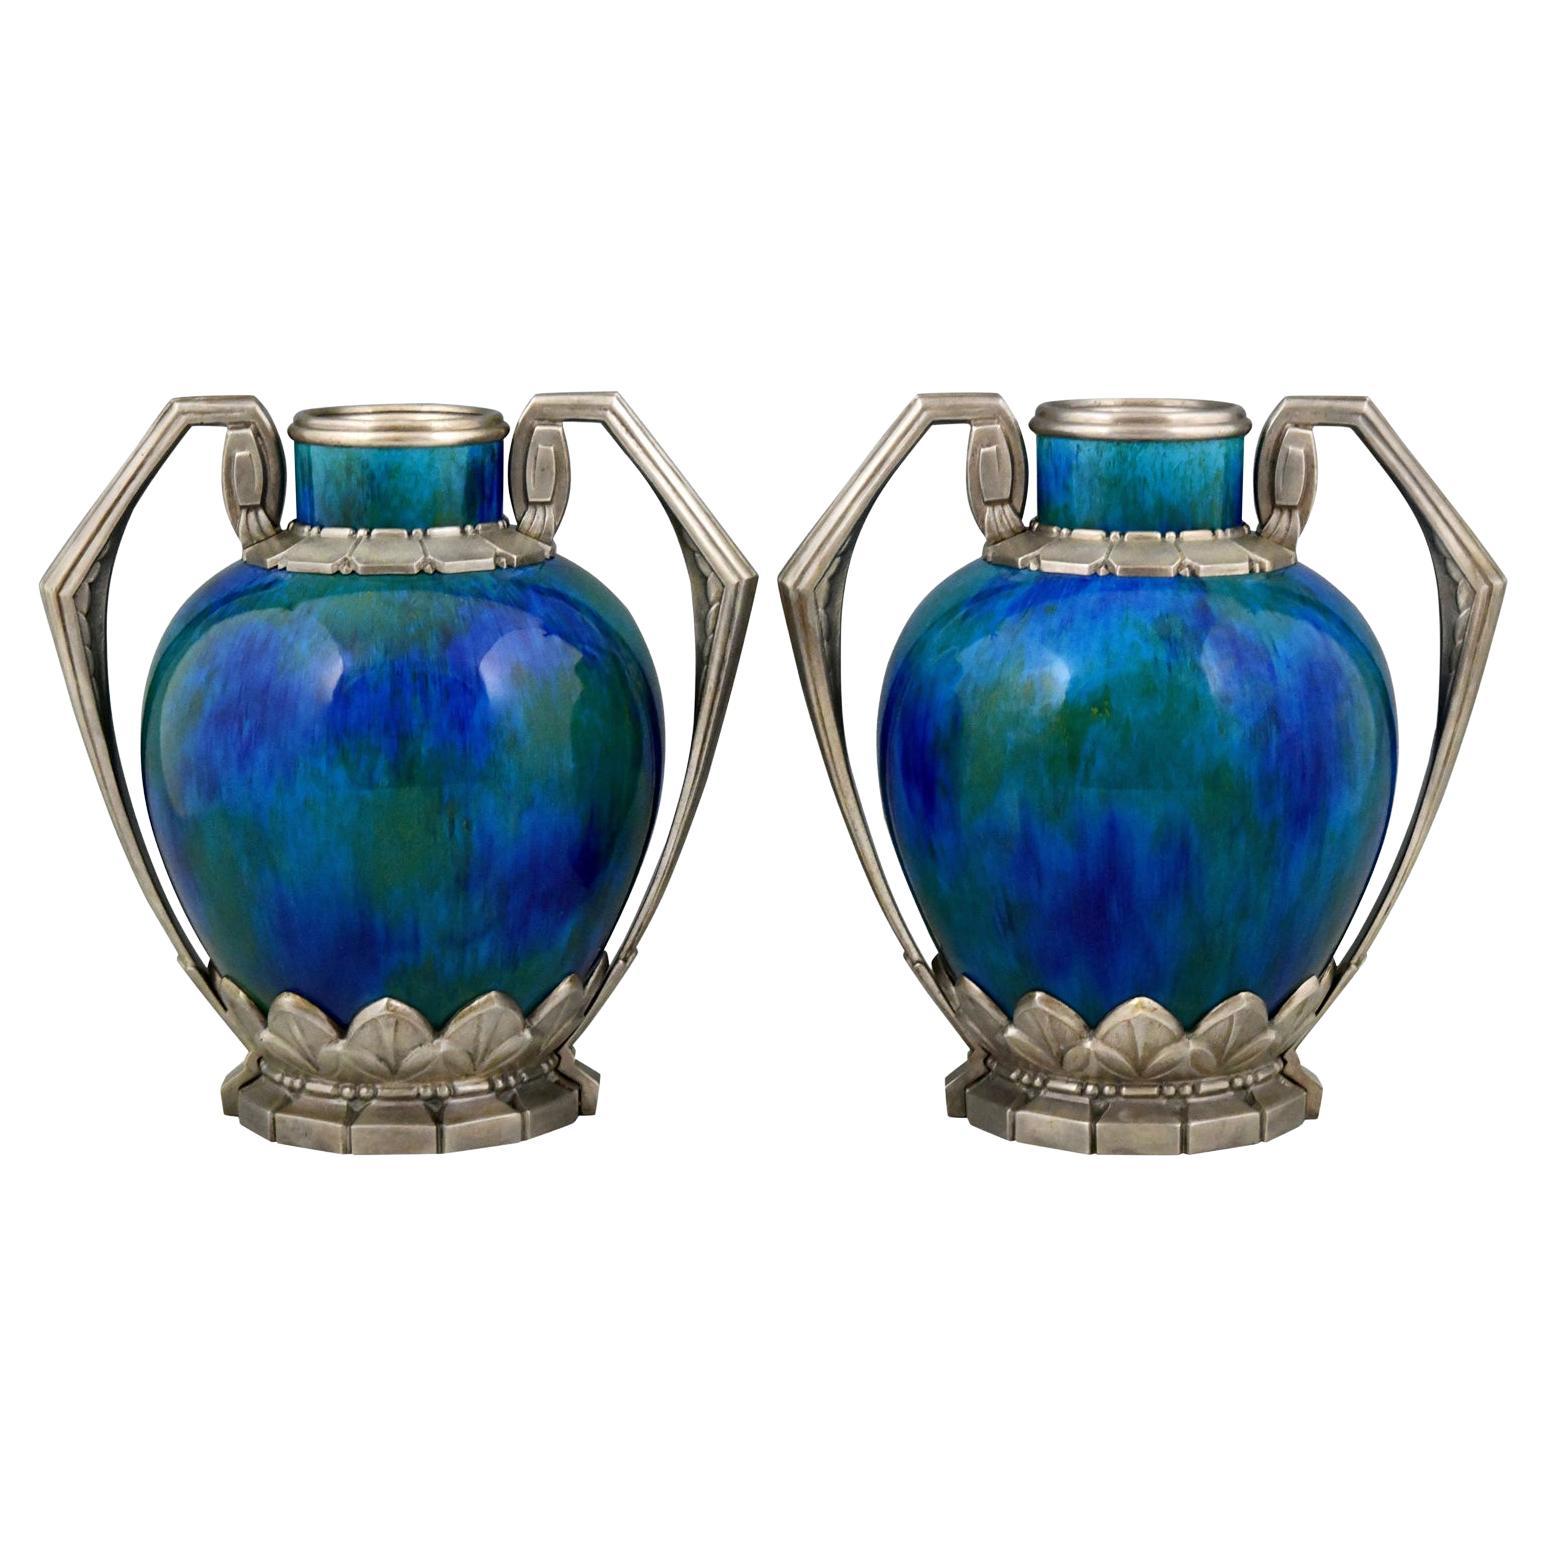 Pair of Art Deco Blue Ceramic and Bronze Vases Paul Milet for Sevres 1920 France